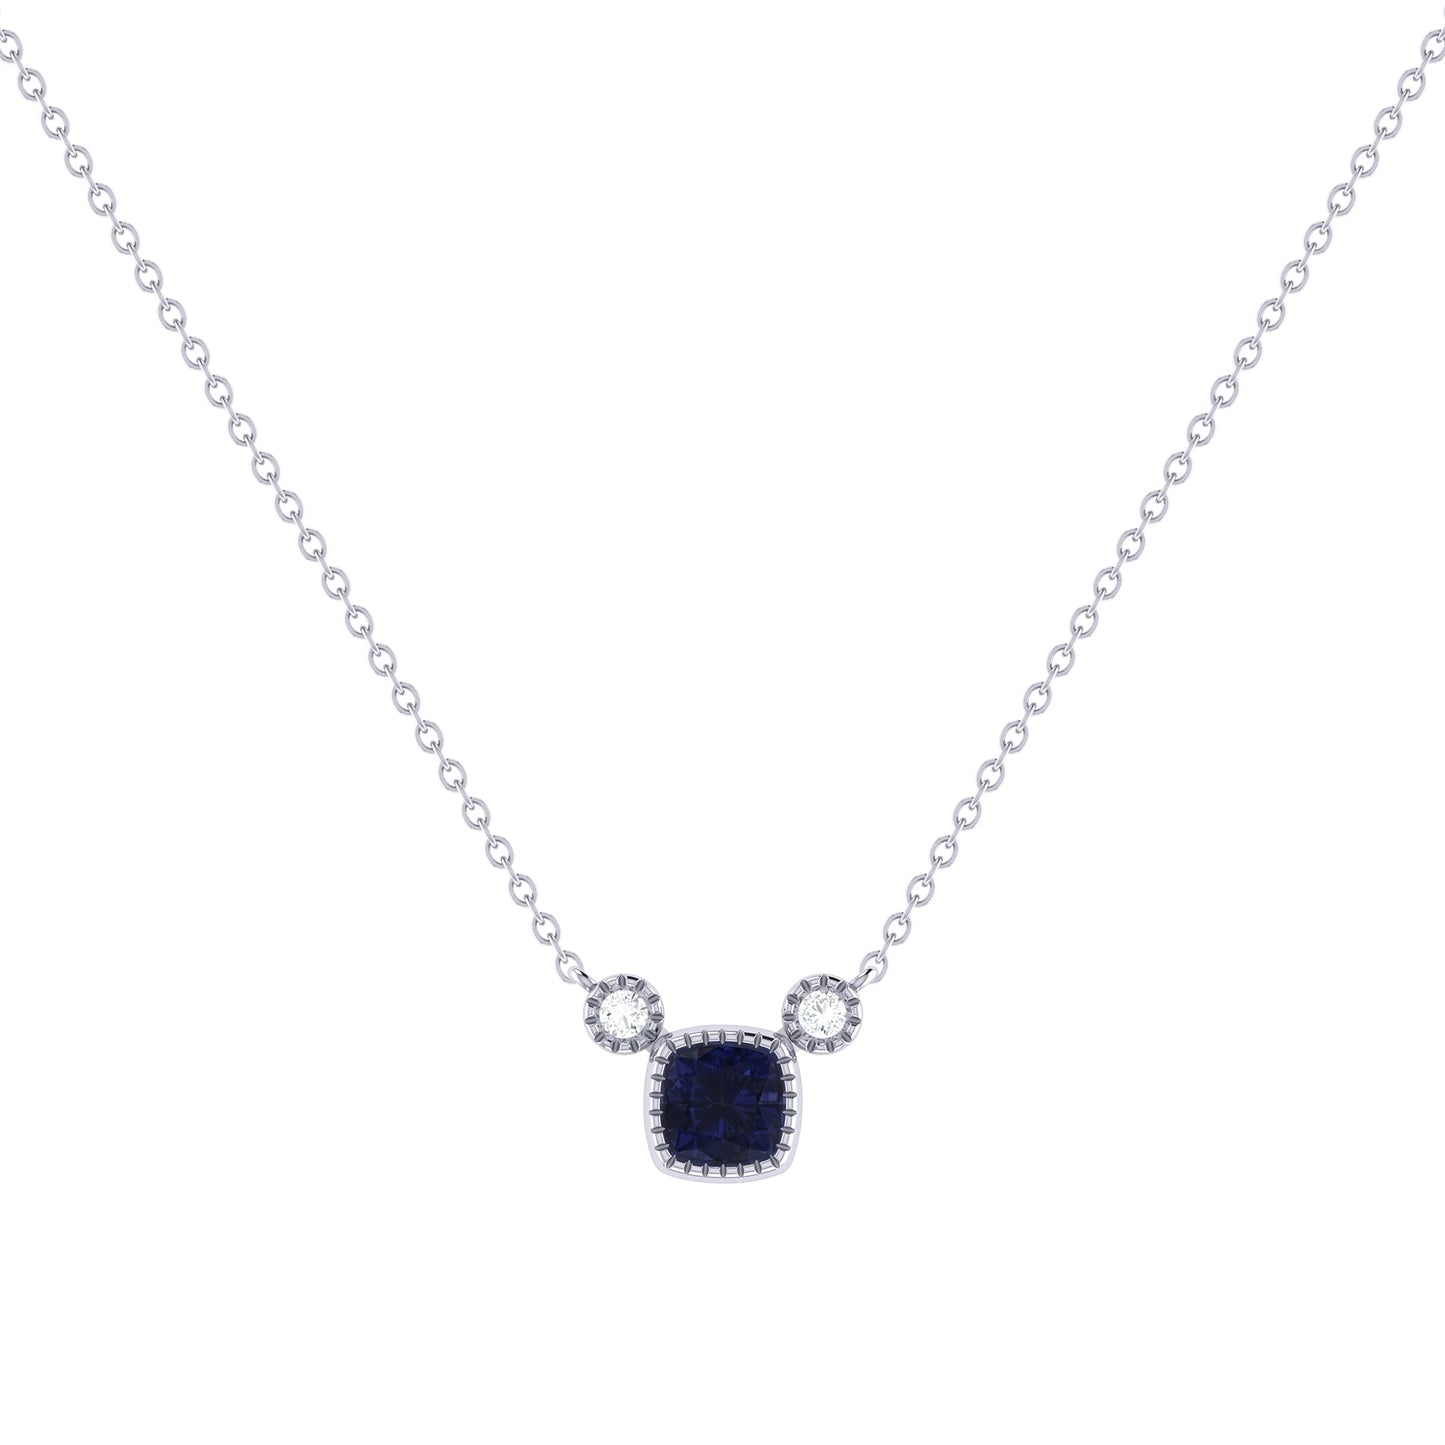 Cushion Cut Sapphire & Diamond Birthstone Necklace In 14K White Gold by LuvMyJewelry